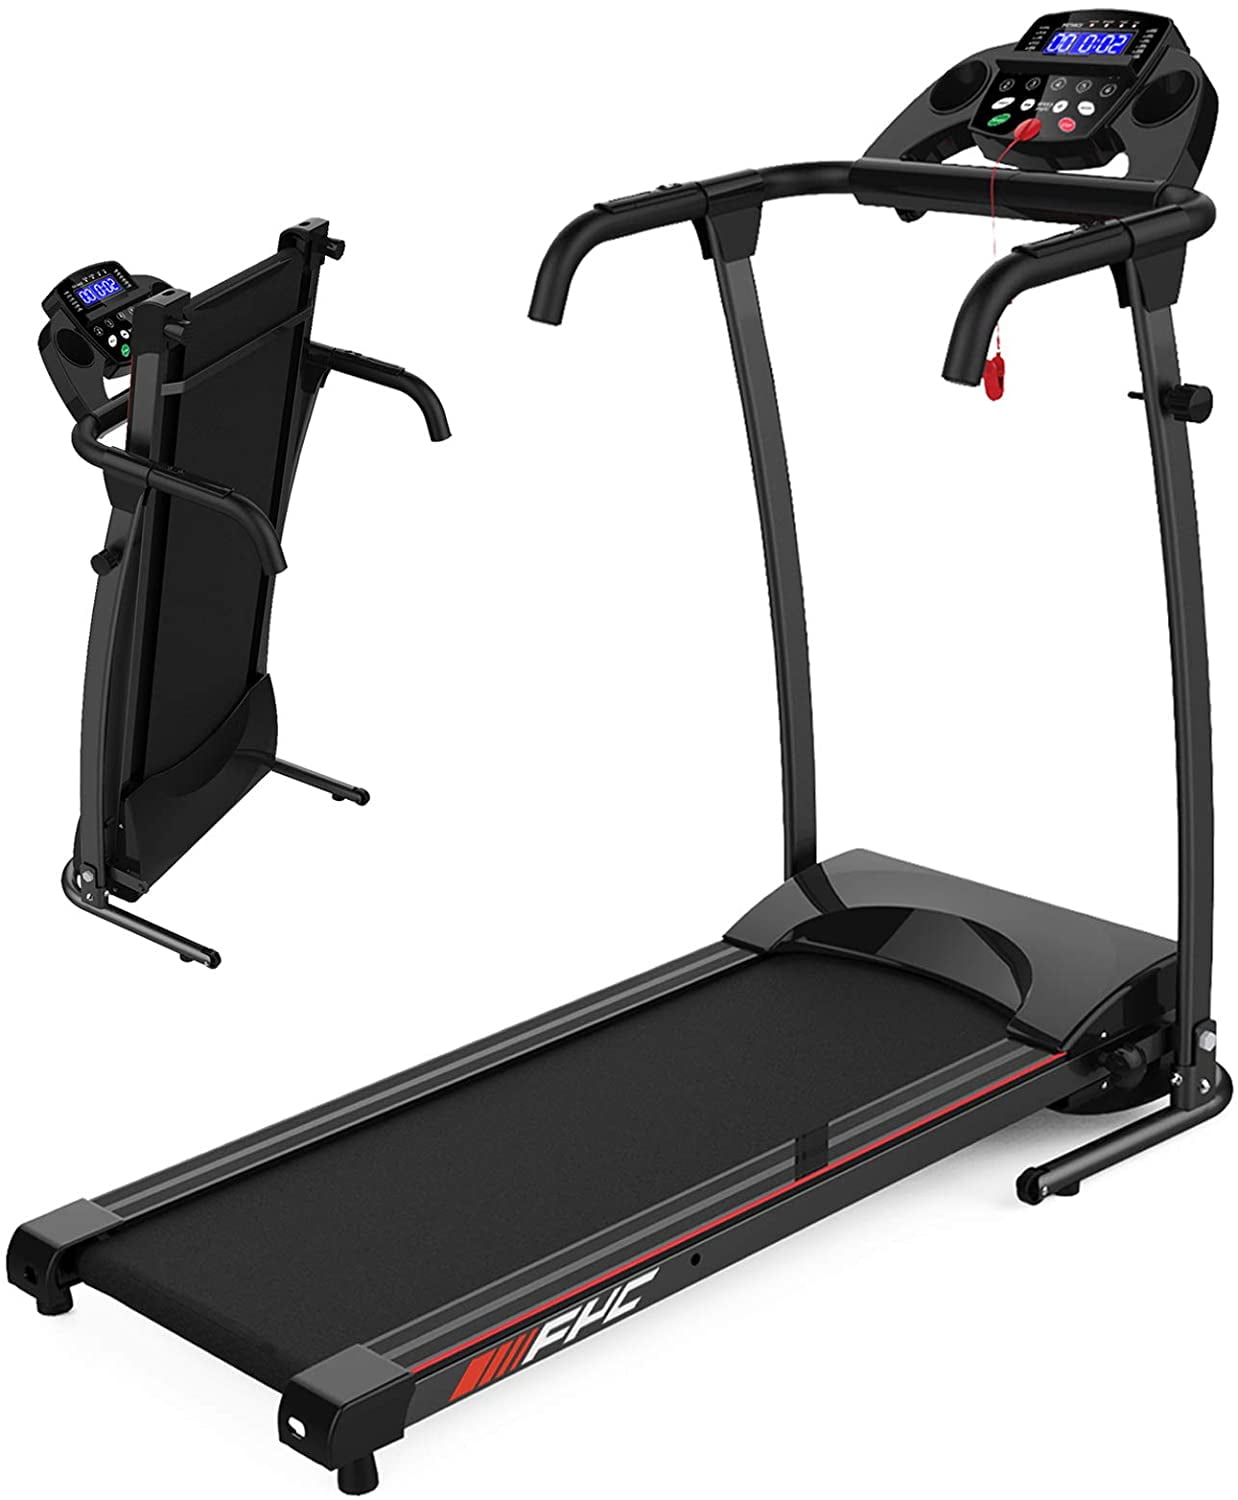 Details about   Home Folding Treadmill Electric Motorized Power Running Jogging Fitness Machine 